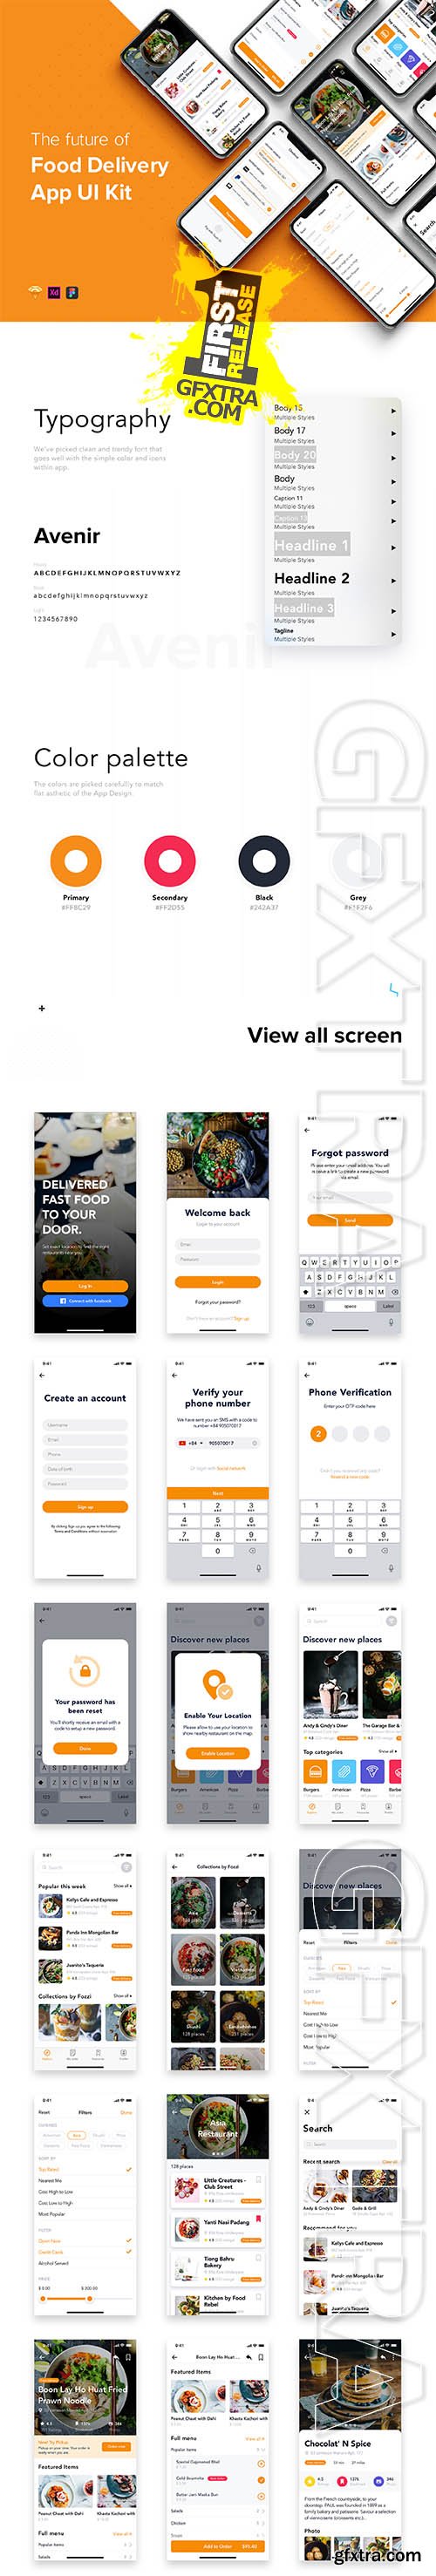 Fozzi - Food Delivery mobile app UI Kit